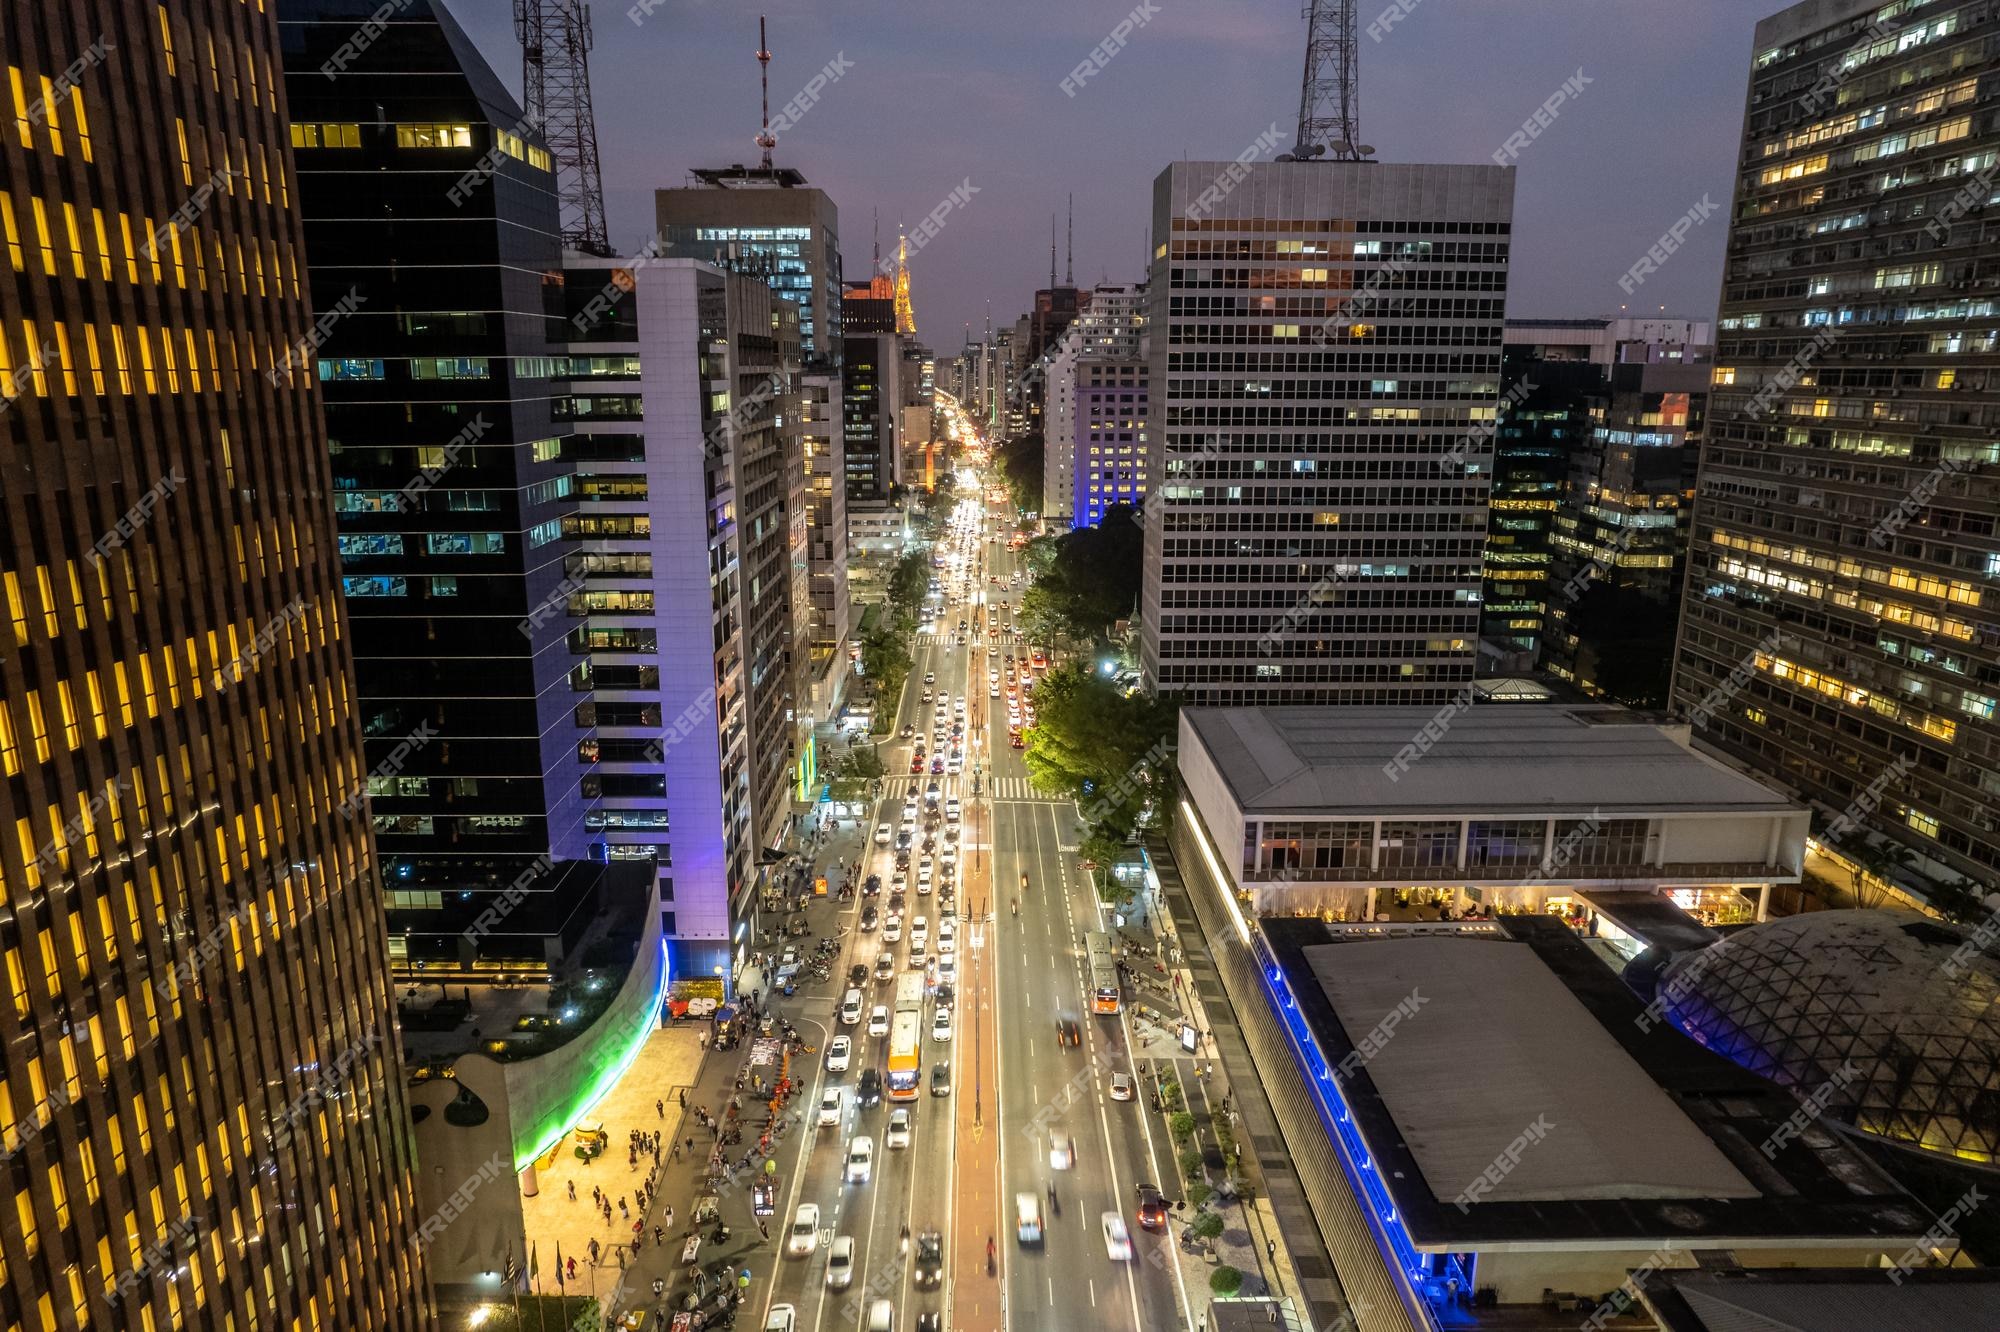 Sao Paulo/Brazil: Decathlon, Forever21 Stores, in Paulista Avenue, Night  Editorial Photography - Image of avenue, downtown: 174237562